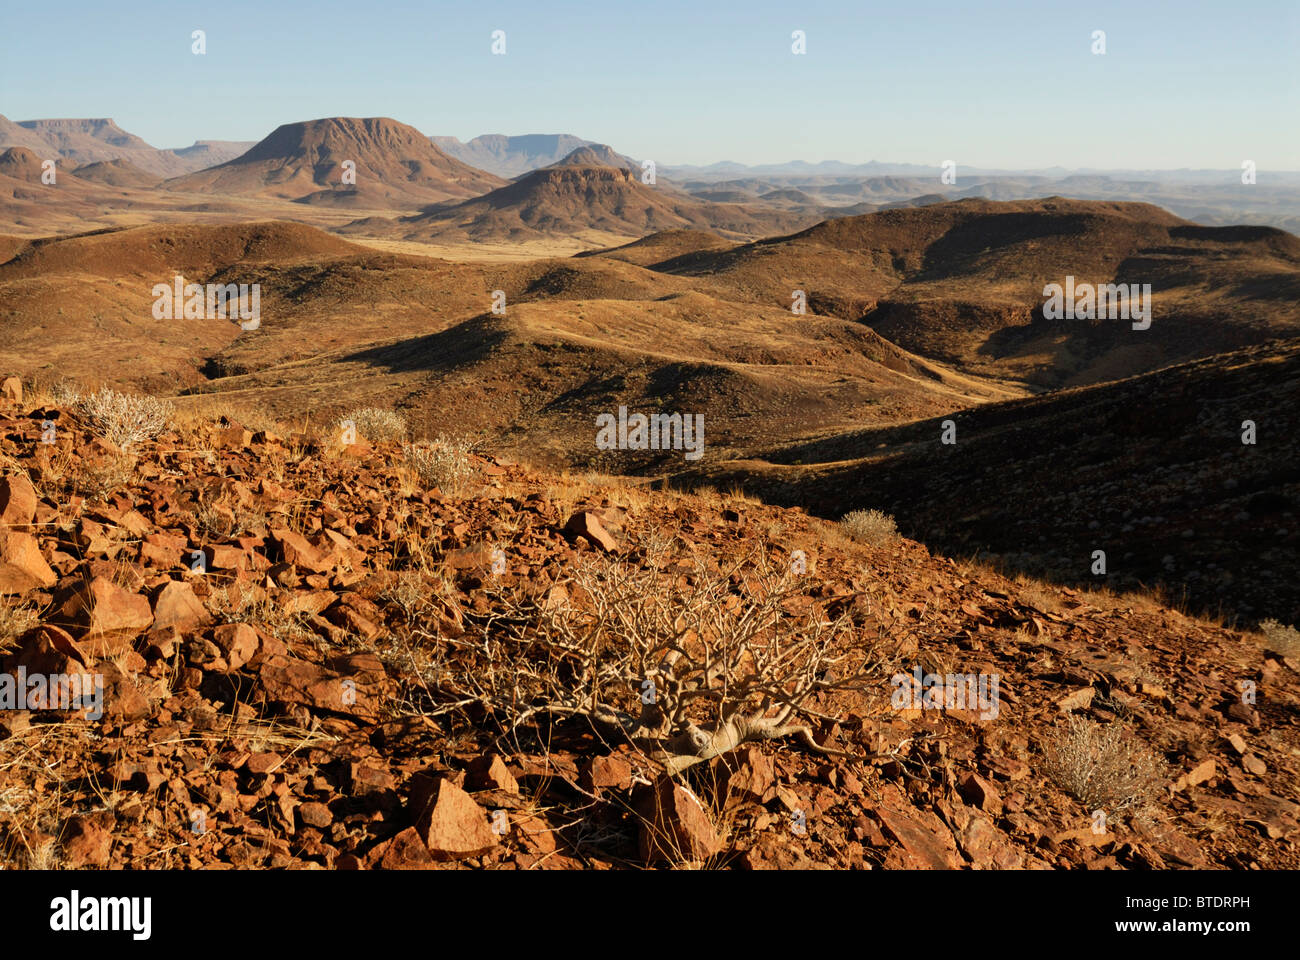 Scenic view of hills and mountains, Commiphora species in foreground Stock Photo